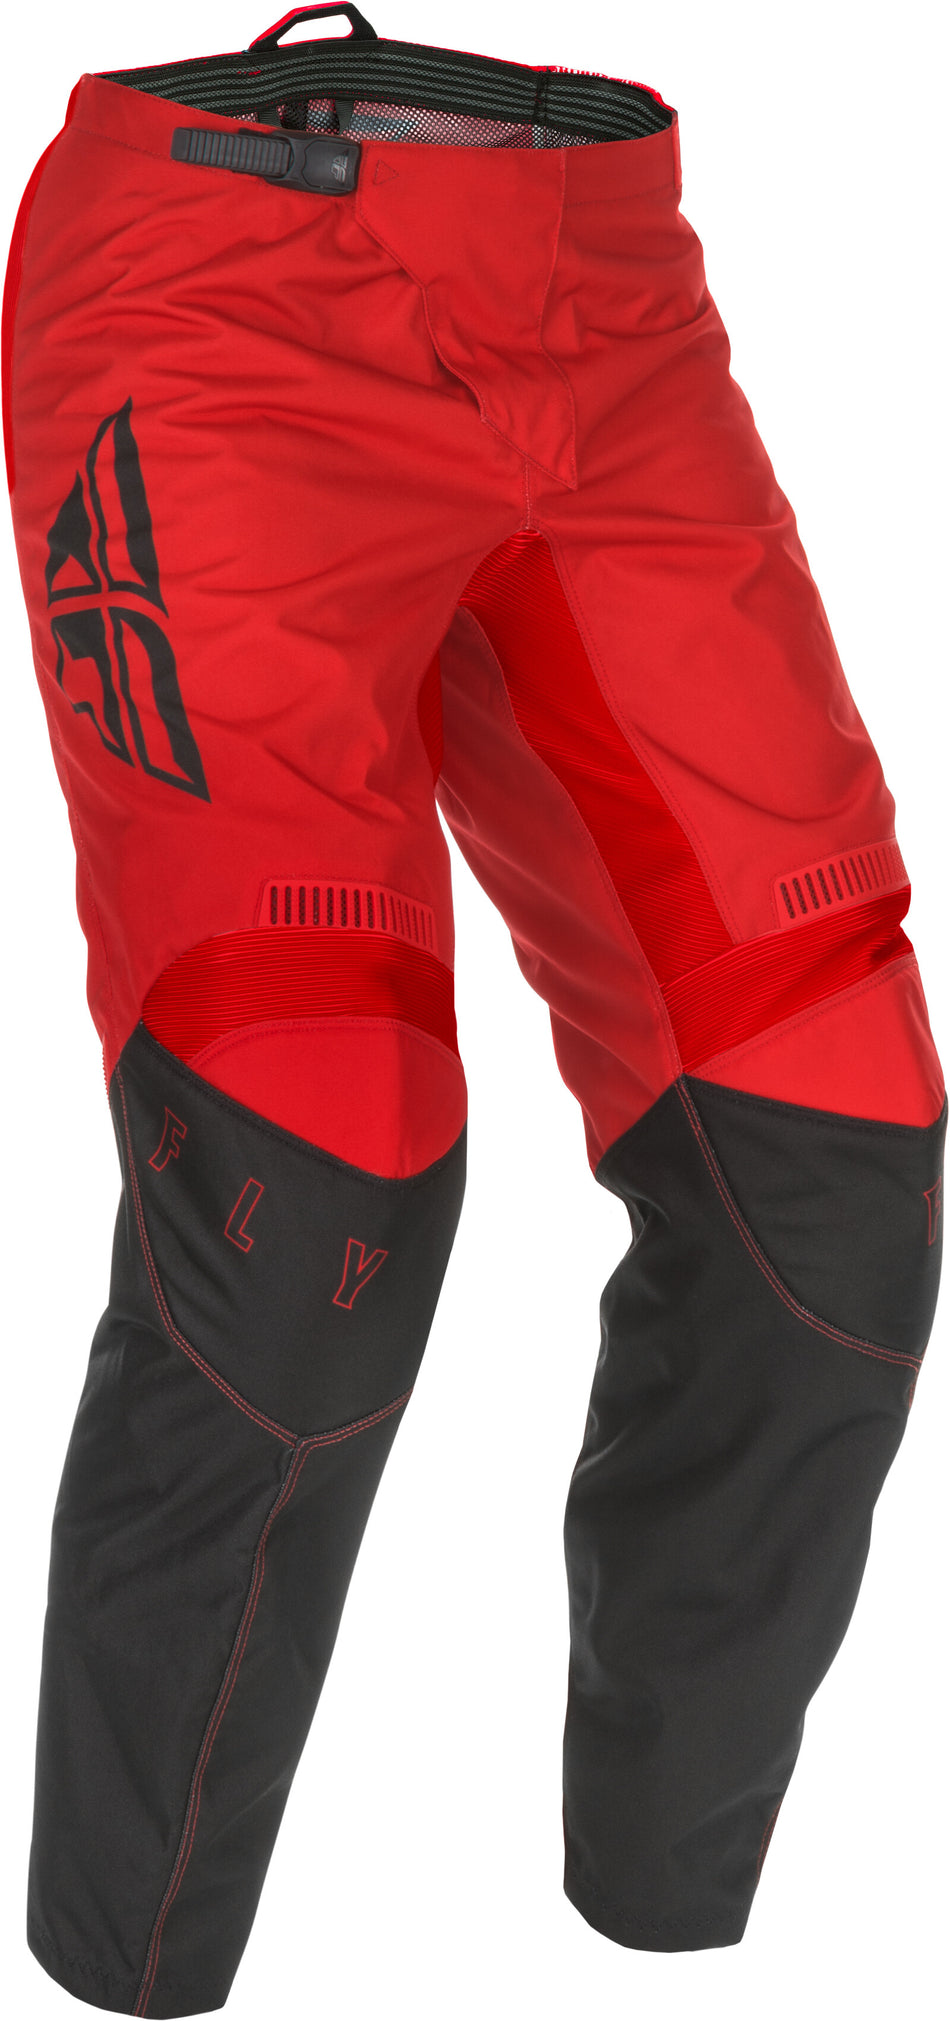 FLY RACING Youth F-16 Pants Red/Black Sz 26 374-93226